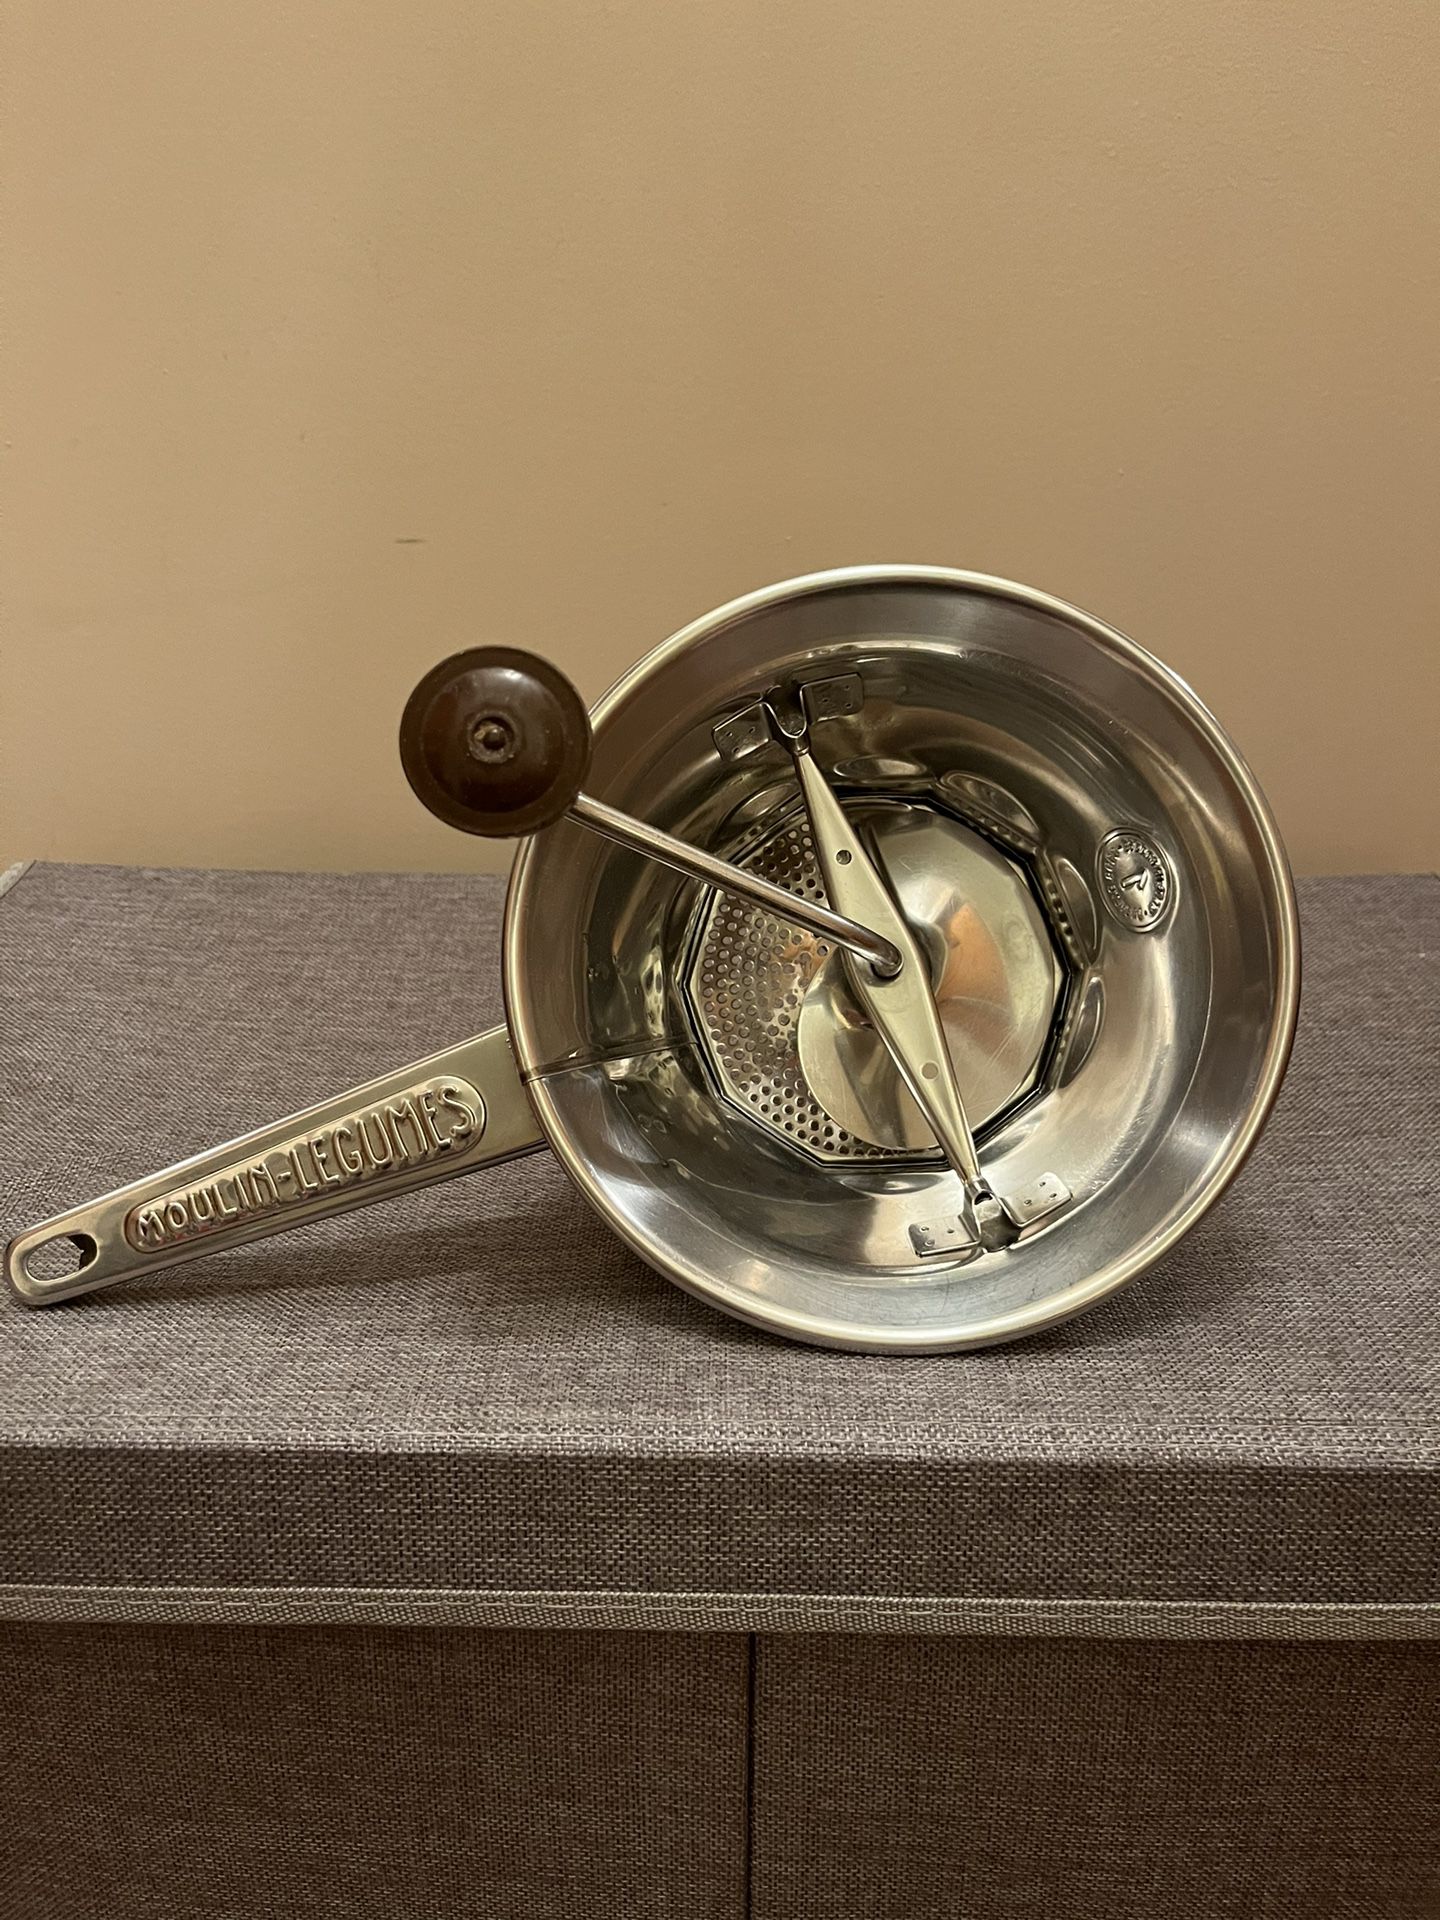 This vintage Moulin-Legumes Rotary Food Mill #1 made in France, is a must-have addition to any kitchen. The brown handle adds color and the metal mate